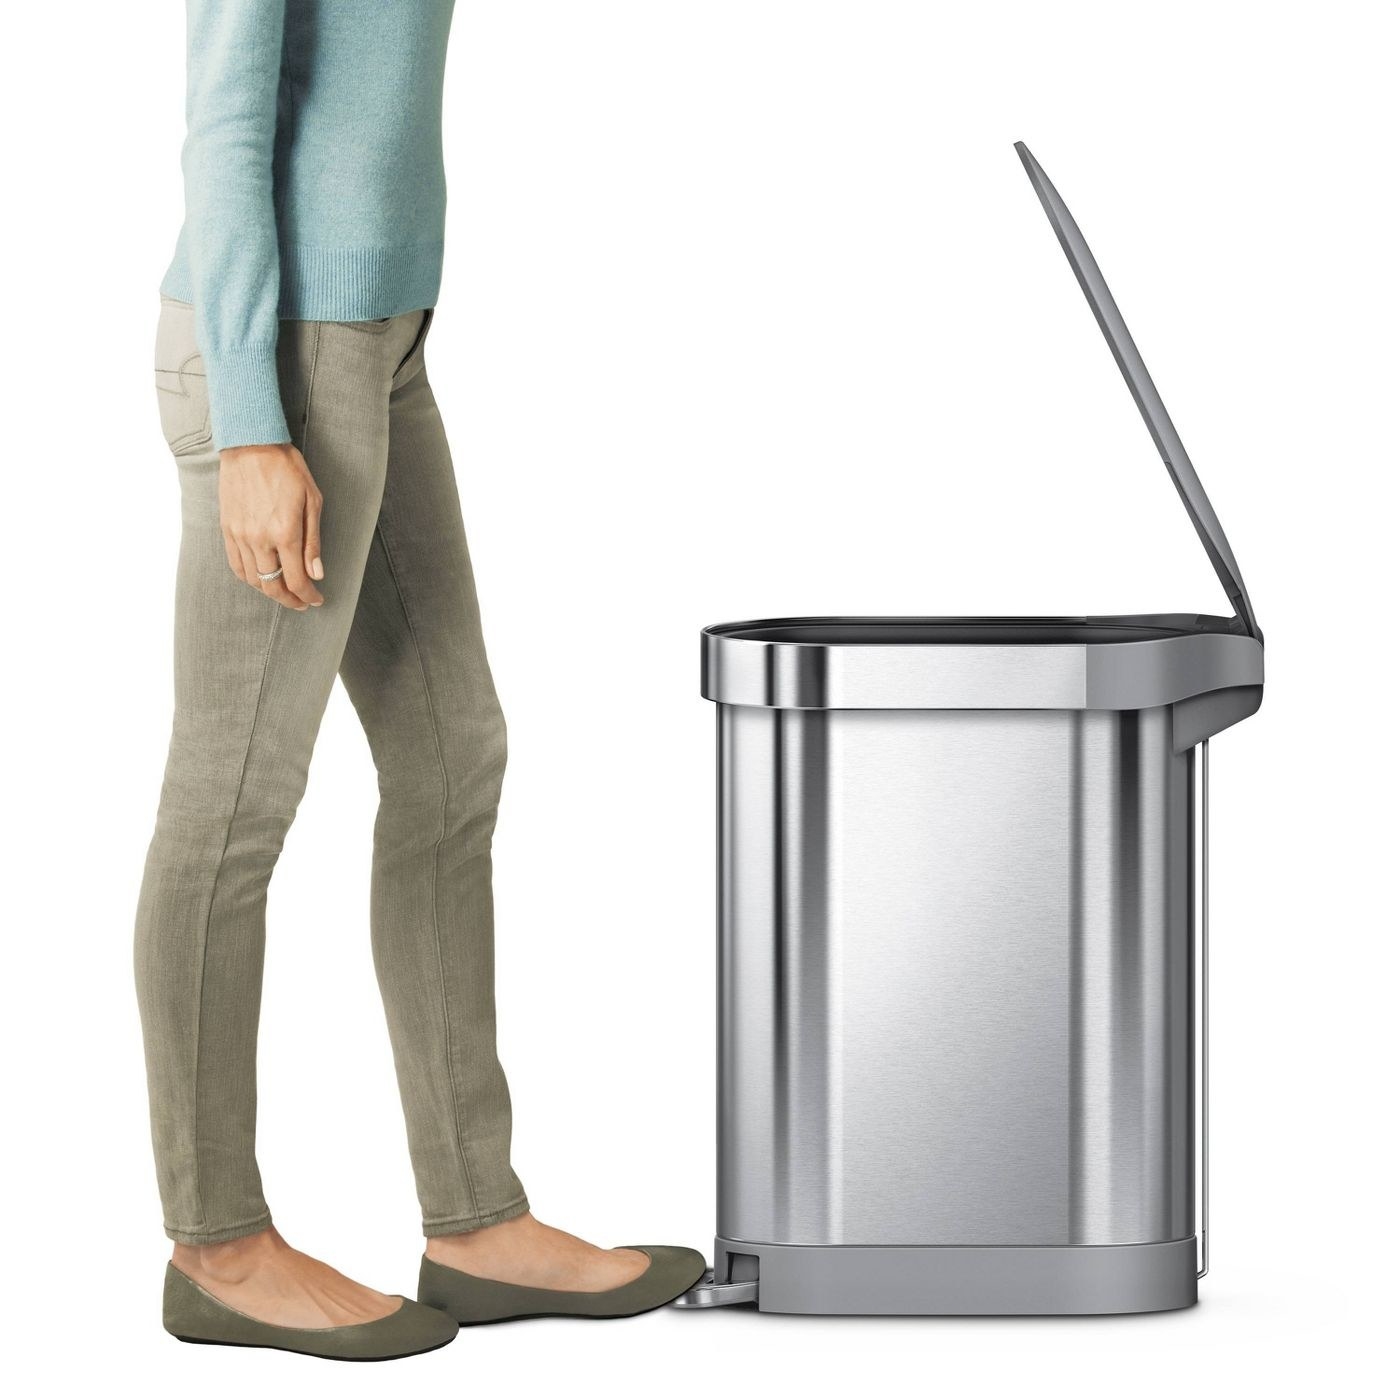 model stepping on the pedal of a stainless steel trash can with lid open